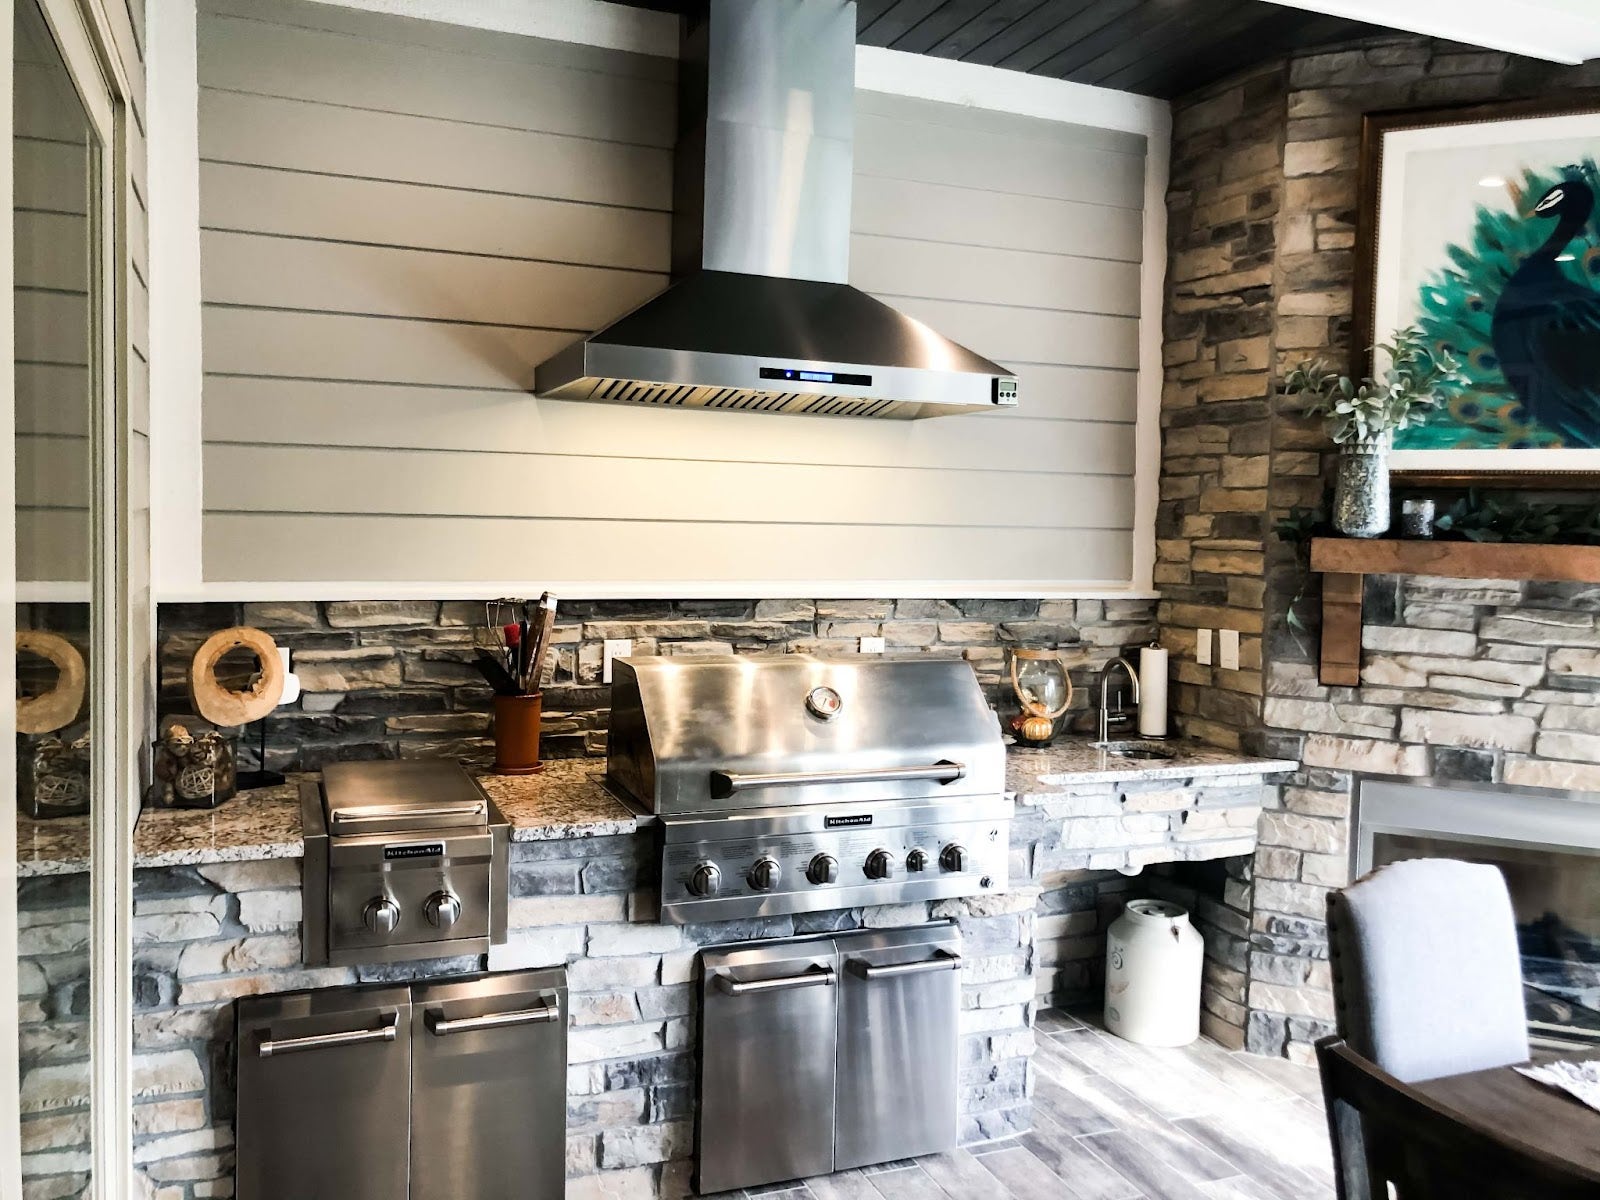 Stylish outdoor cooking area featuring a Proline range hood, stone fireplace, and premium grilling equipment - prolinerangehoods.com